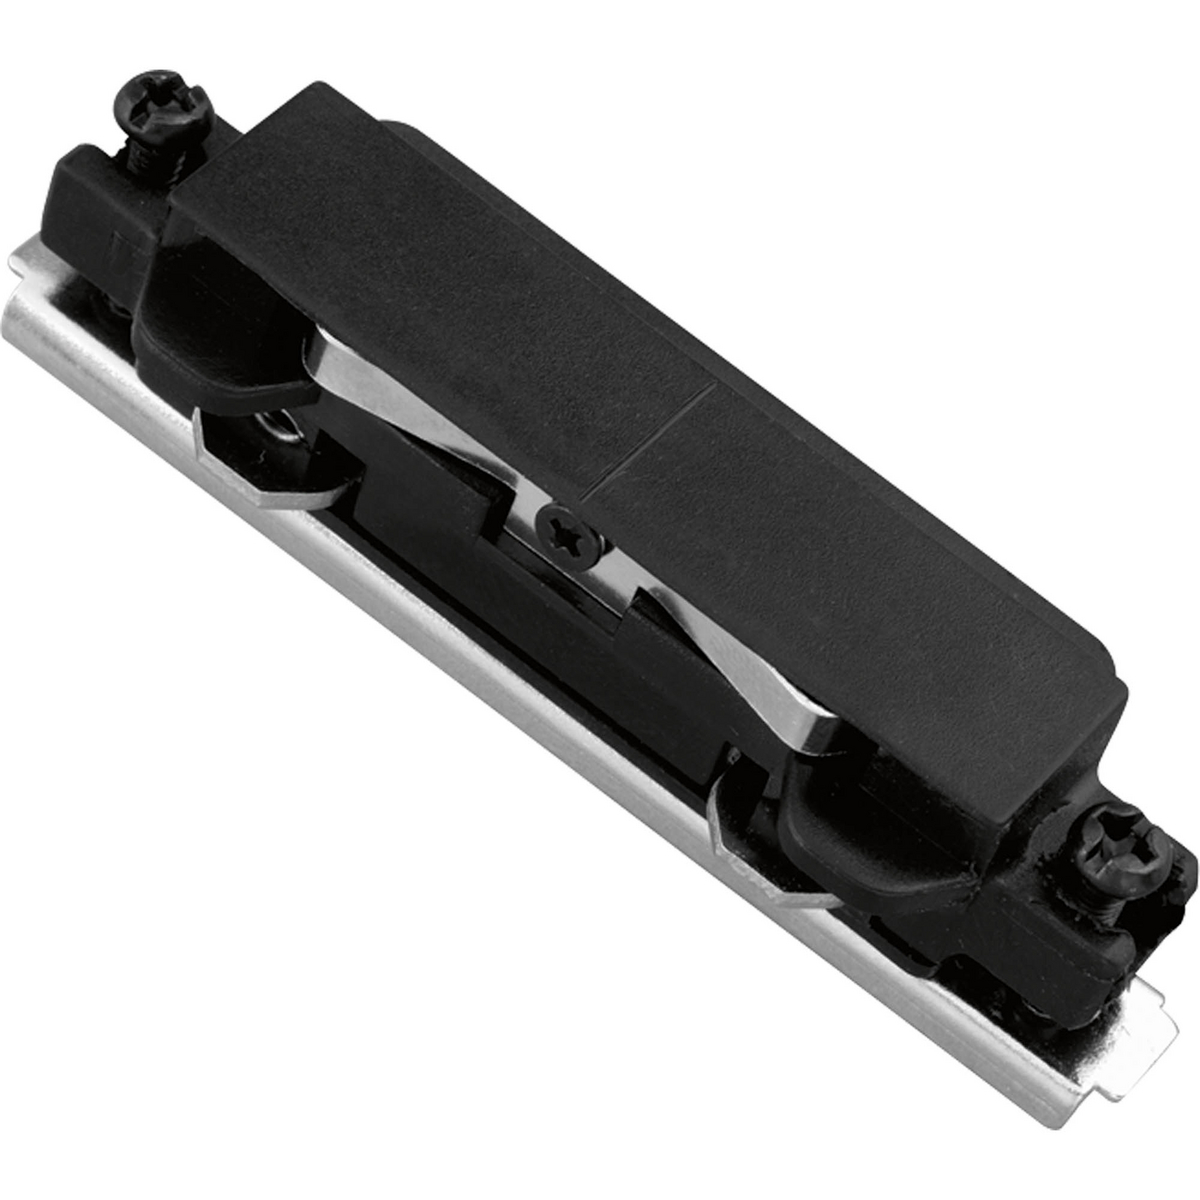 Straight connector for joining two or more track sections. The connectors plug into track sections only one way to ensure positive polarization. Black finish.